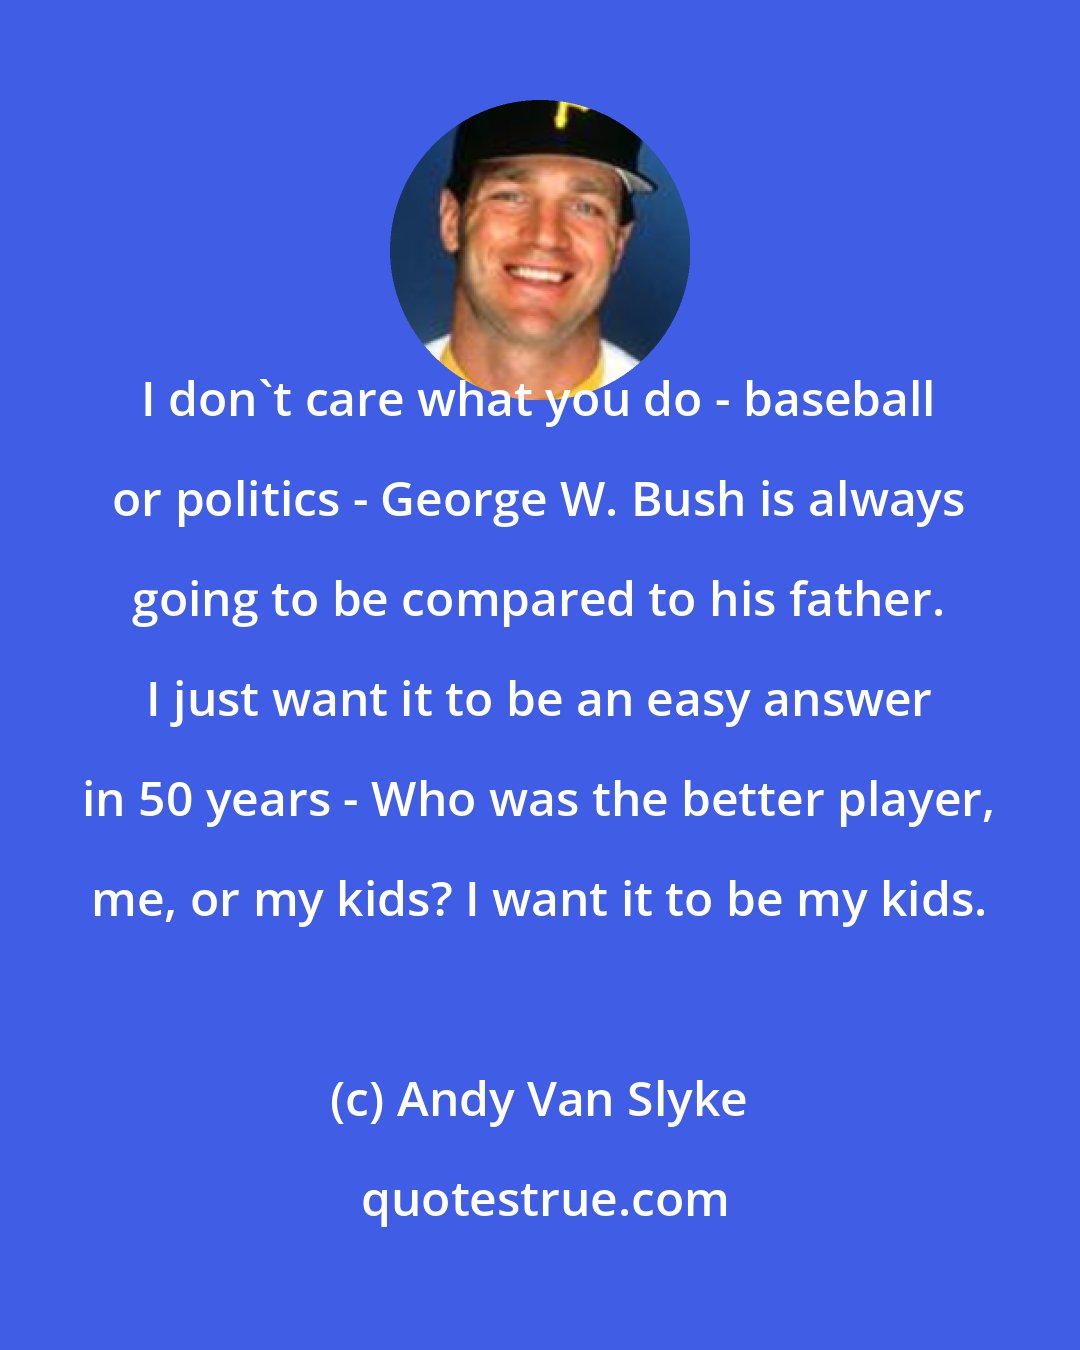 Andy Van Slyke: I don't care what you do - baseball or politics - George W. Bush is always going to be compared to his father. I just want it to be an easy answer in 50 years - Who was the better player, me, or my kids? I want it to be my kids.